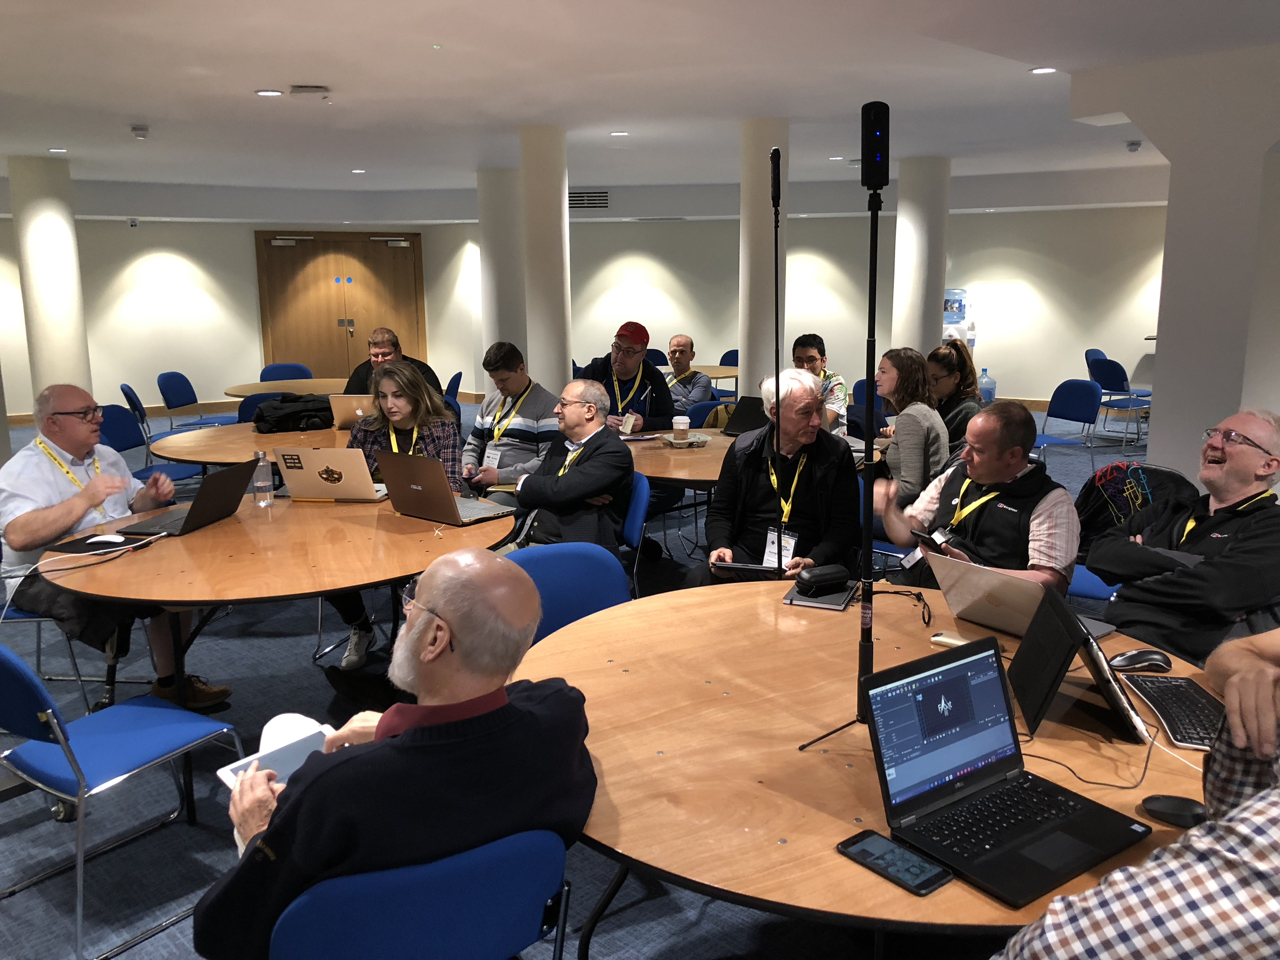 Martin aka Hopki leads a Pano2VR workshop at the IVRPA conference in Belfast.